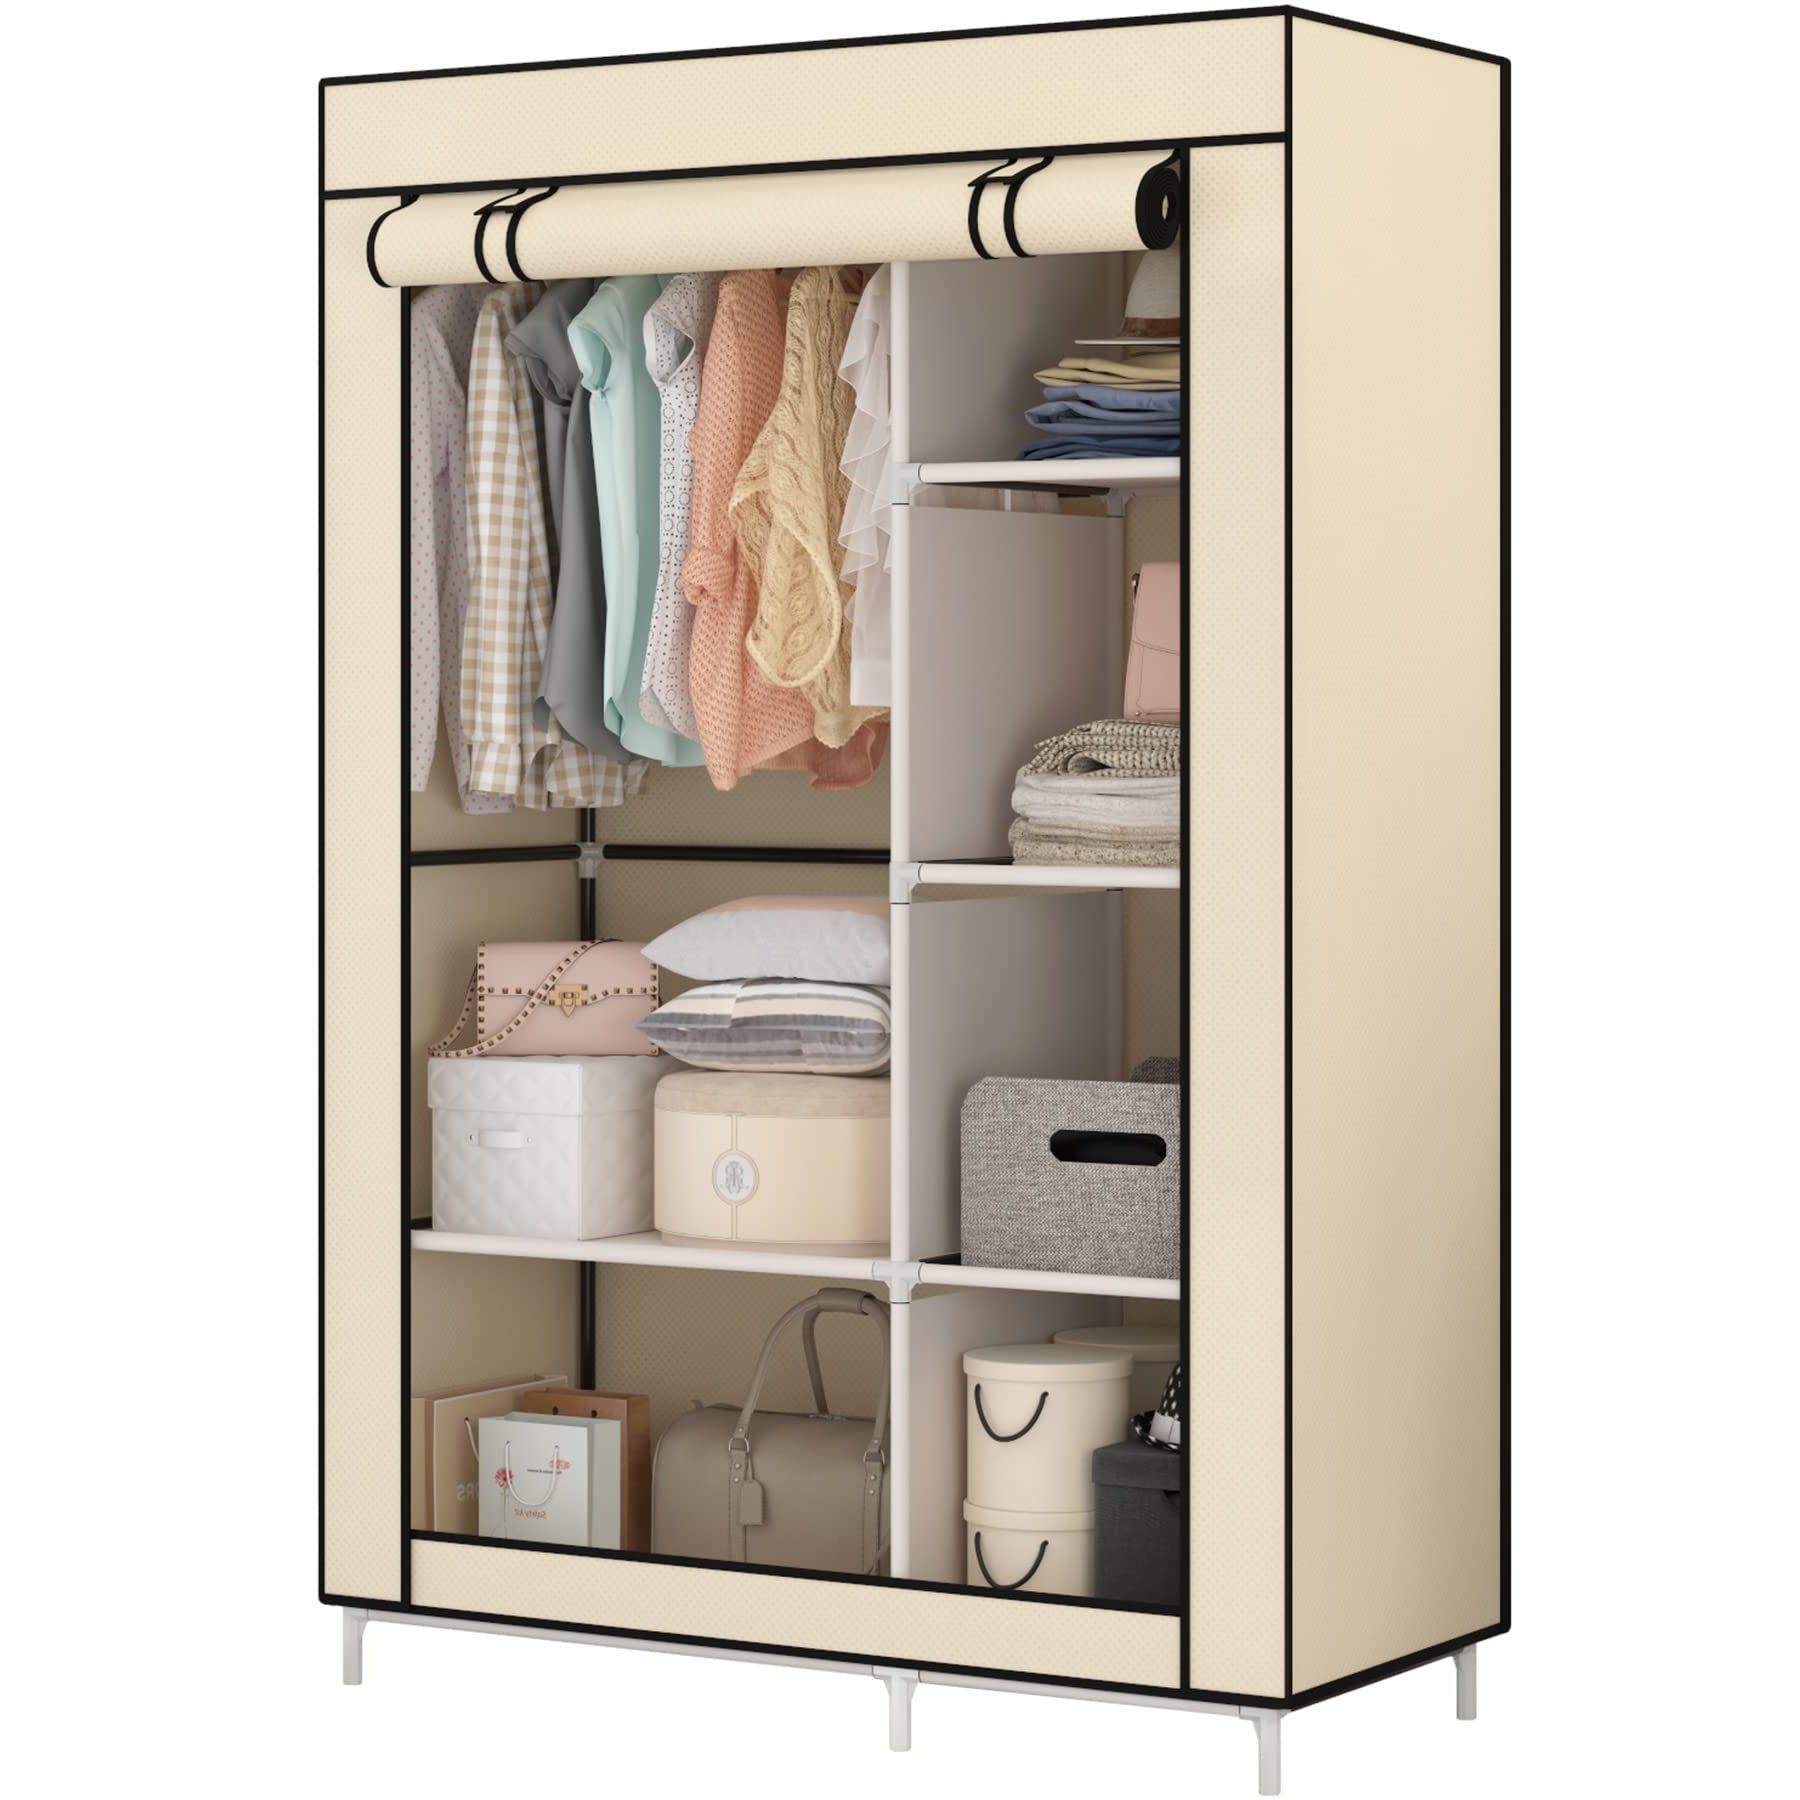 Most Recent 6 Shelf Wardrobes For Amazon: Calmootey Closet Storage Organizer,portable Wardrobe With 6  Shelves And Clothes Rod,non Woven Fabric Cover With 4 Side Pockets,beige :  Home & Kitchen (Photo 7 of 10)